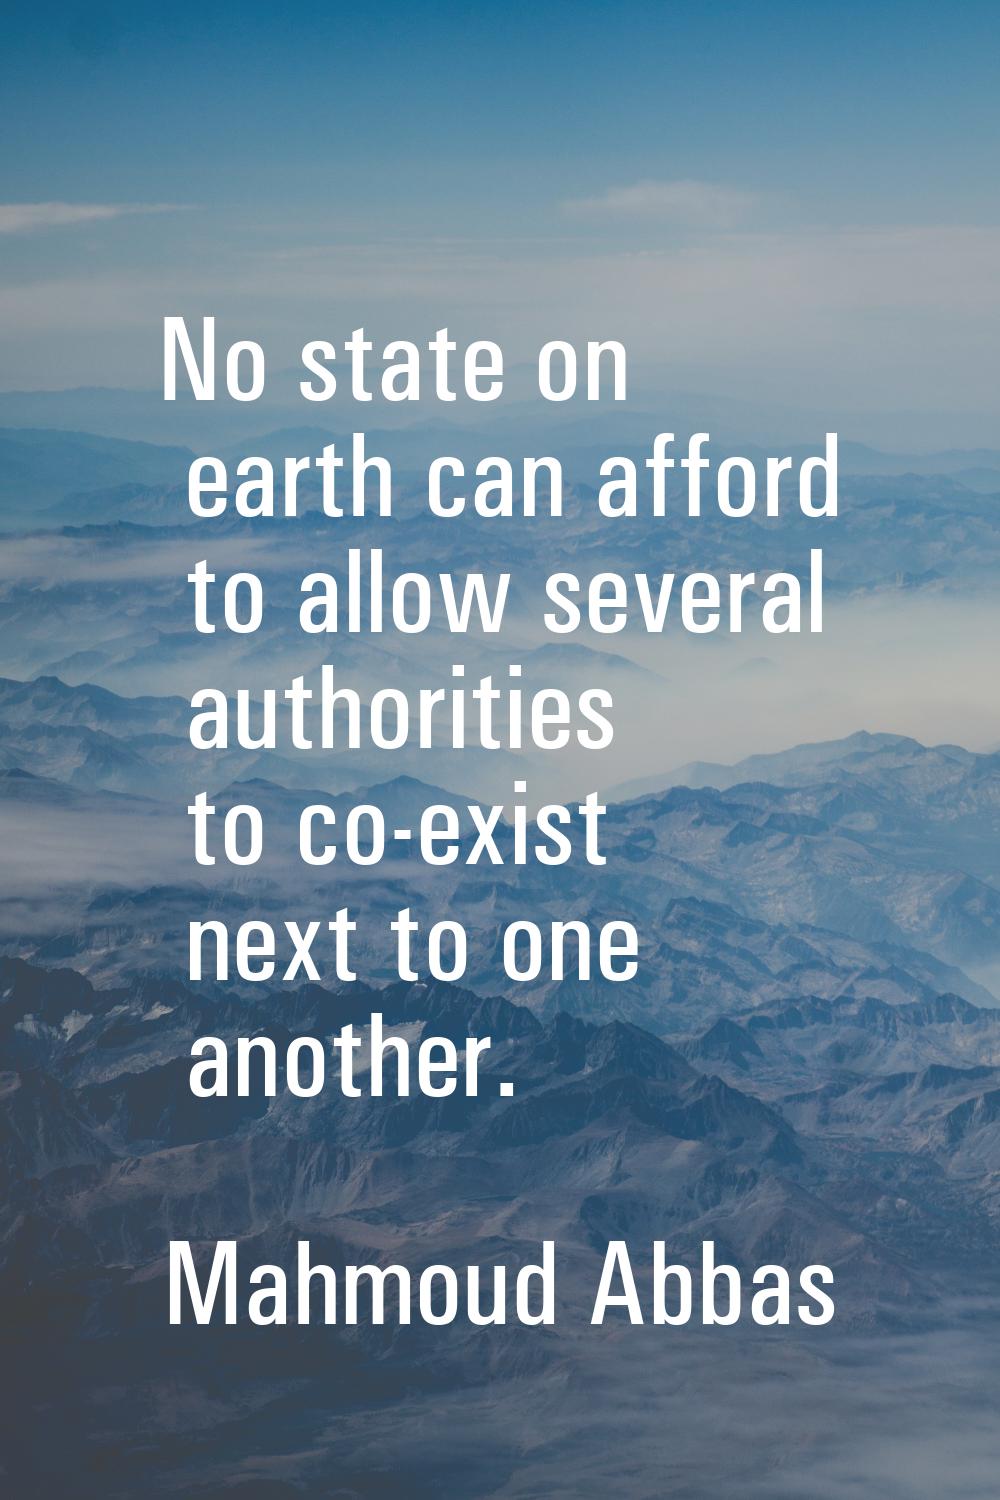 No state on earth can afford to allow several authorities to co-exist next to one another.